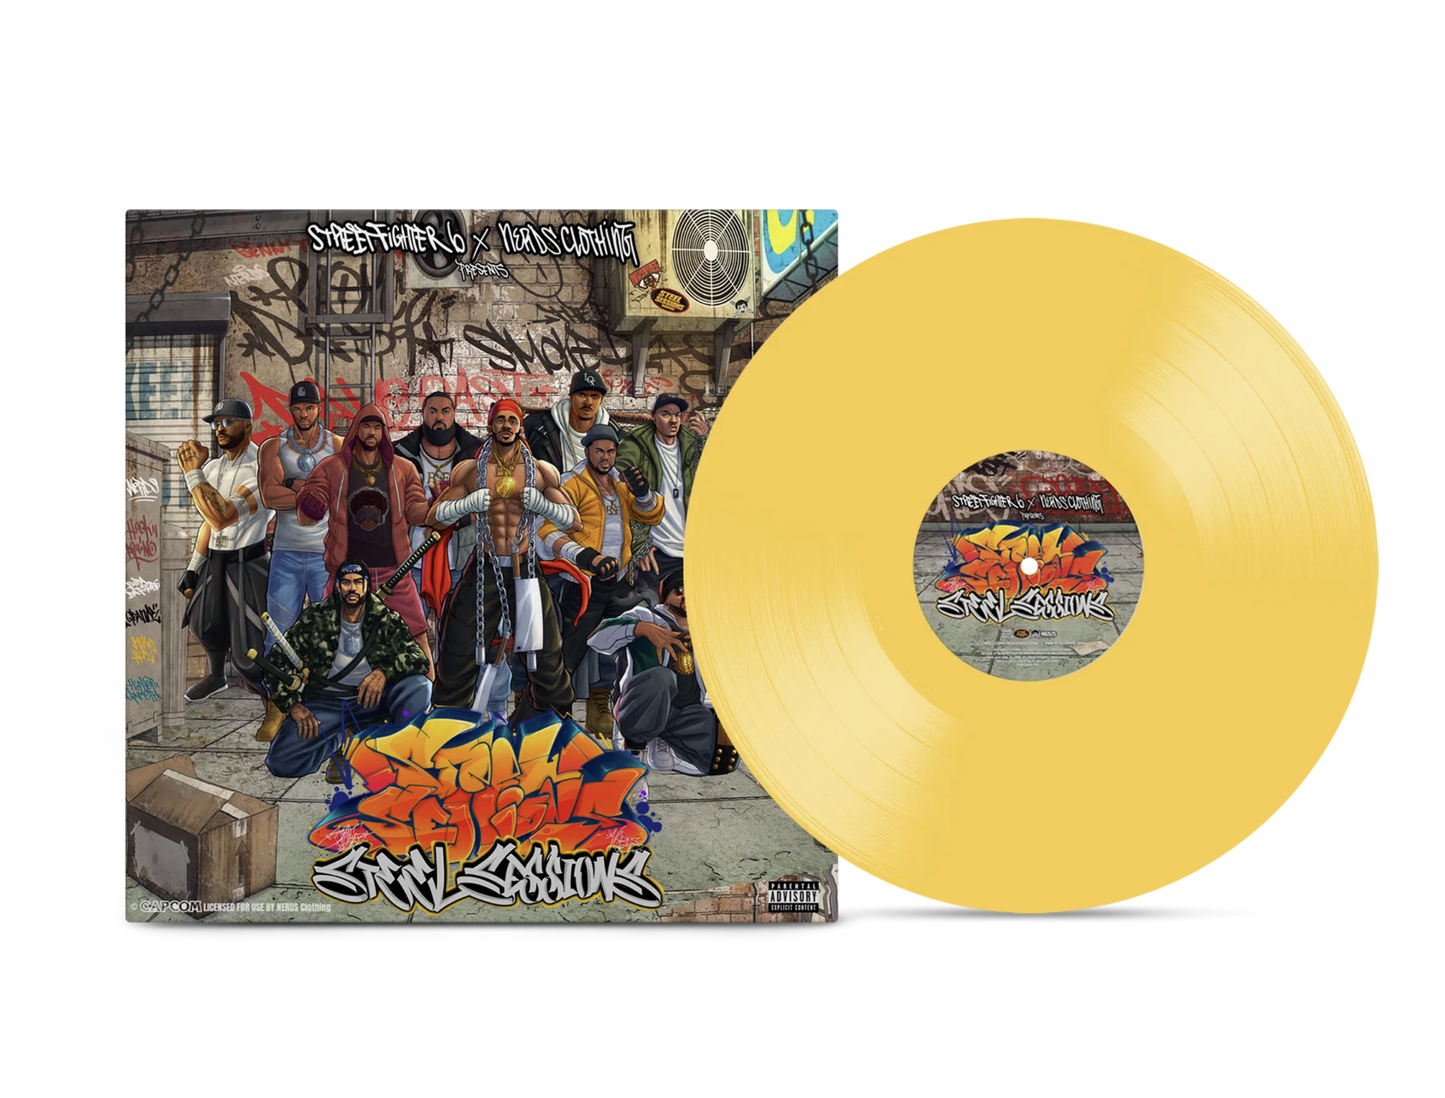 STREET FIGHTER 6 x NERDS Clothing Presents: Steel Sessions (Collectors Vinyl)